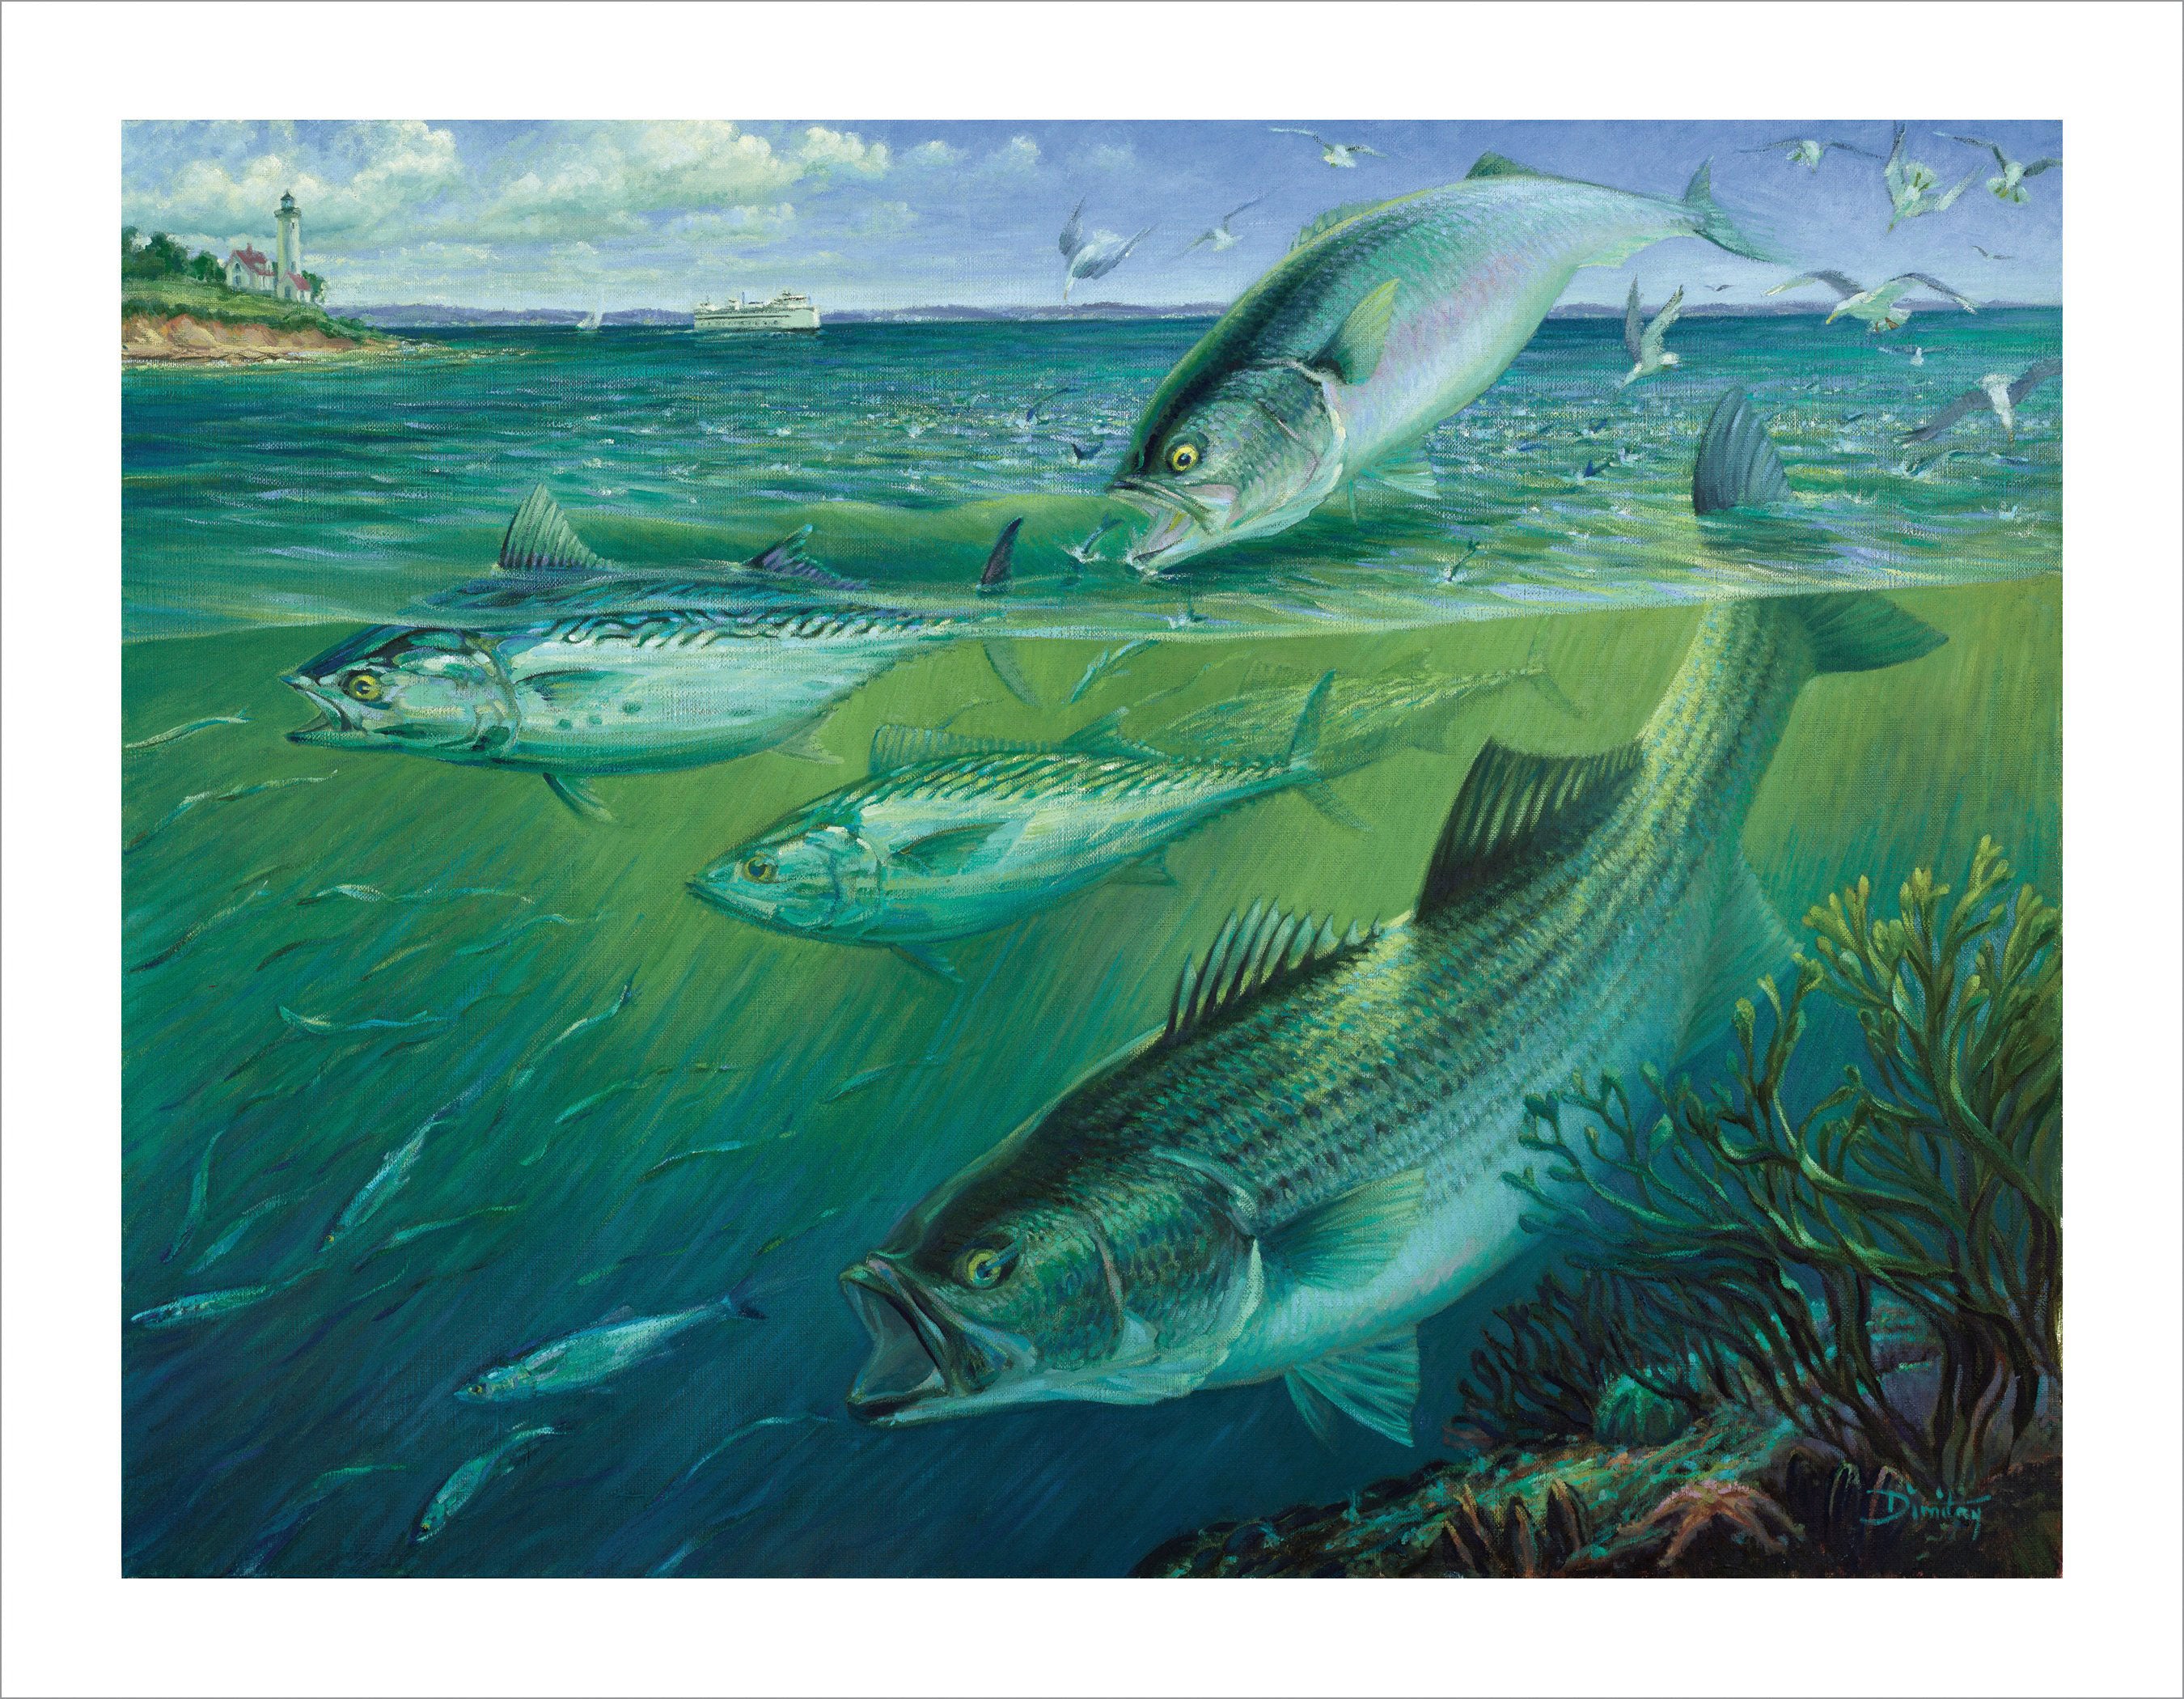 California runs hot and cold on striped bass – UCSC Science Notes